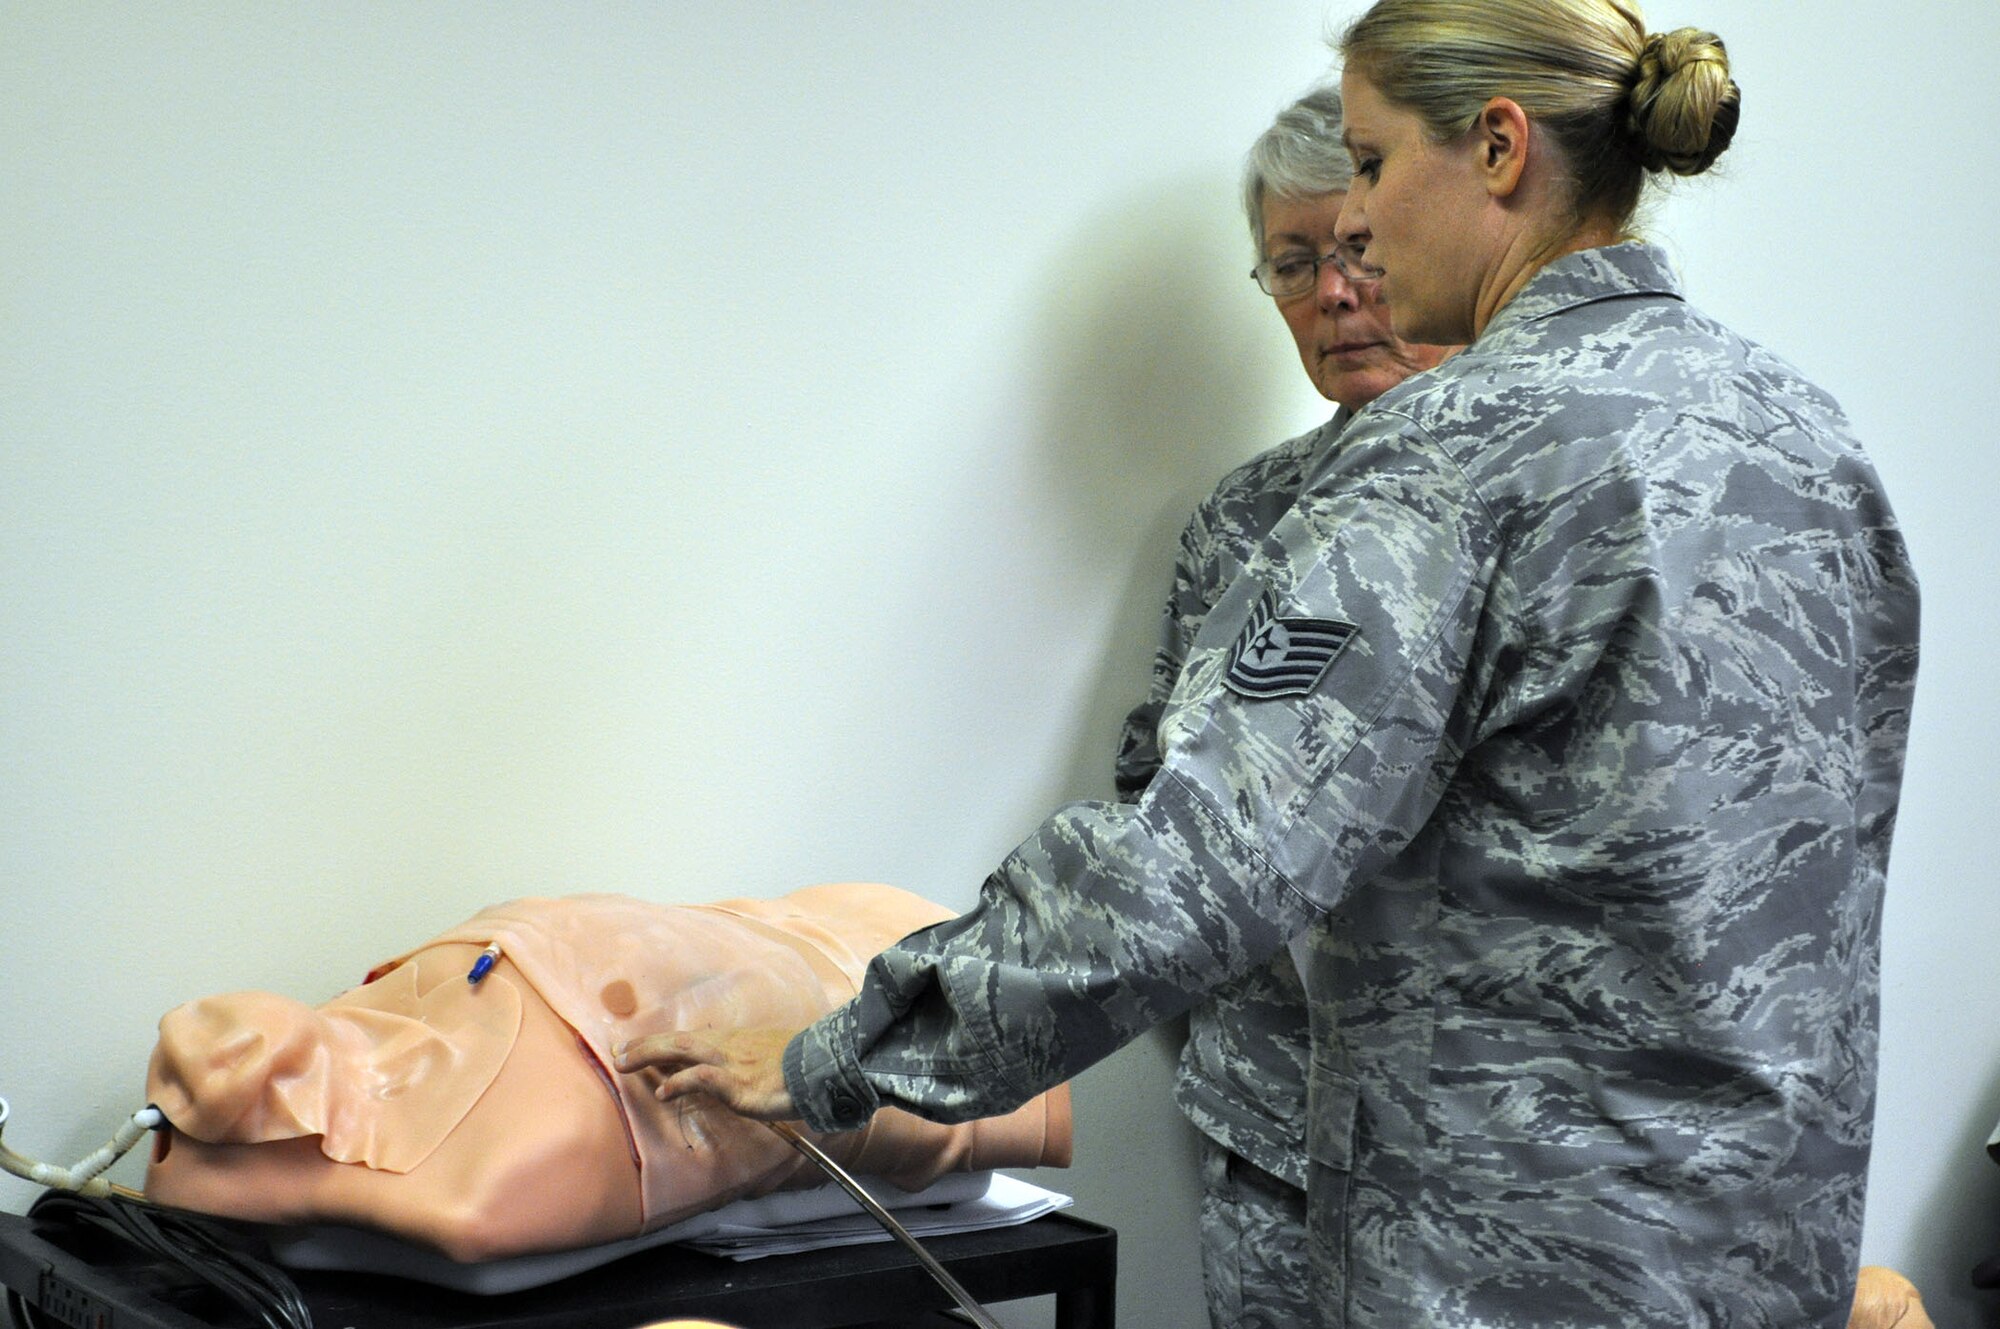 TRAVIS AIR FORCE BASE, Calif. -- Medical Technician, Tech. Sgt. Bobi Skogen, talks about chest tubes and insertion with her instructor. During the Sept. 7 and 8 “Super” unit training assembly weekend for the 349th Air Mobility Wing, Reserve doctors, nurses, and medical technicians, were able to use the center to train on procedures and skills they use less often. (U.S. Air Force photo/Ellen Hatfield)